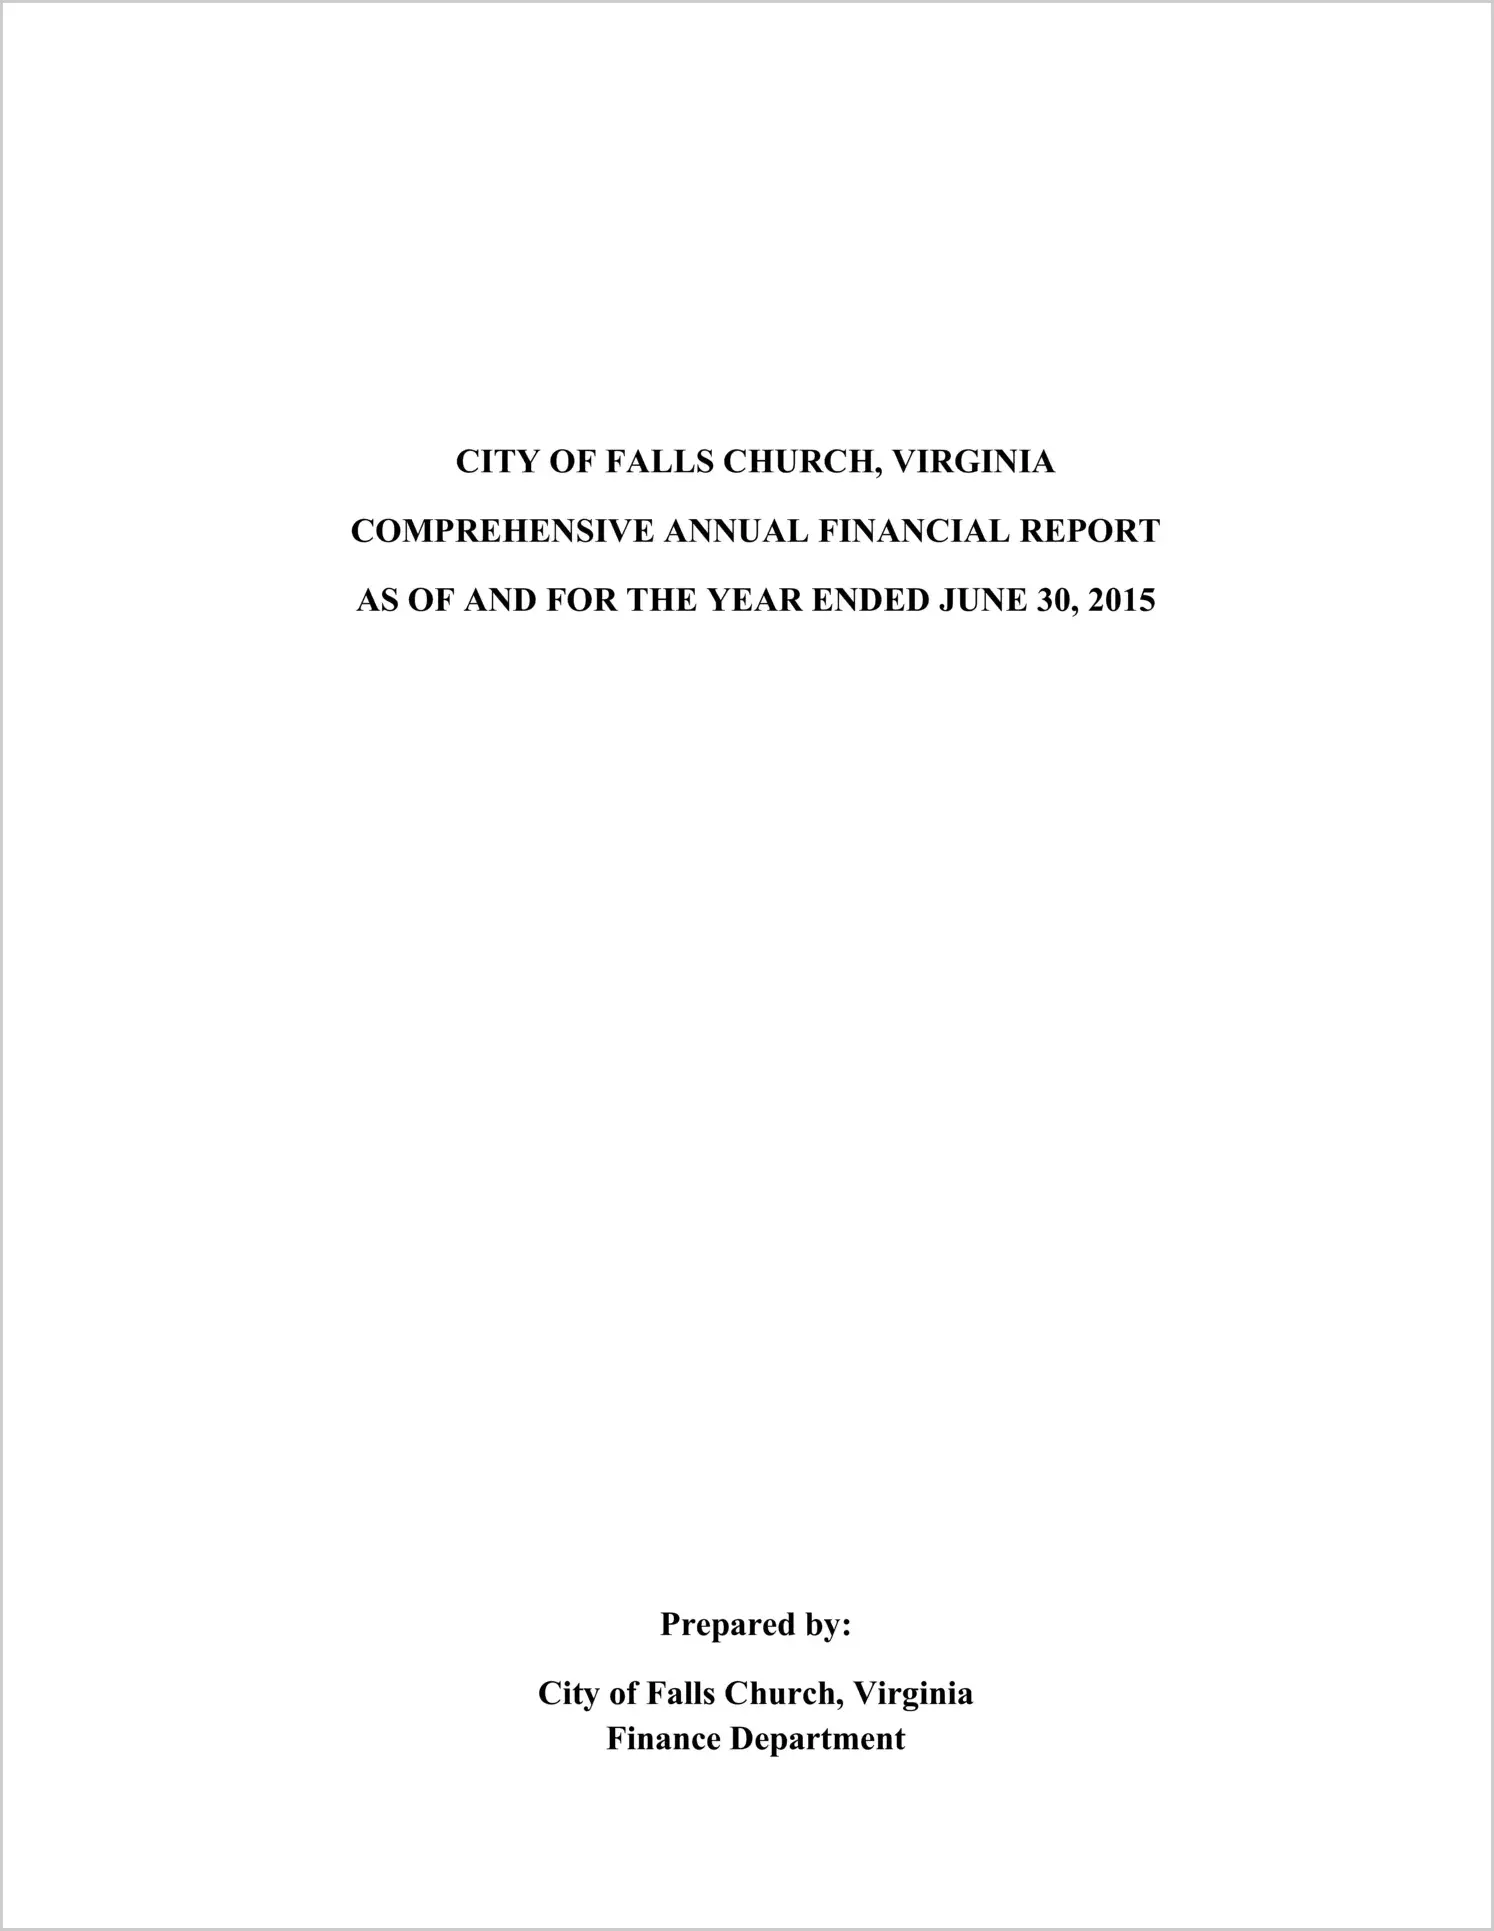 2015 Annual Financial Report for City of Falls Church